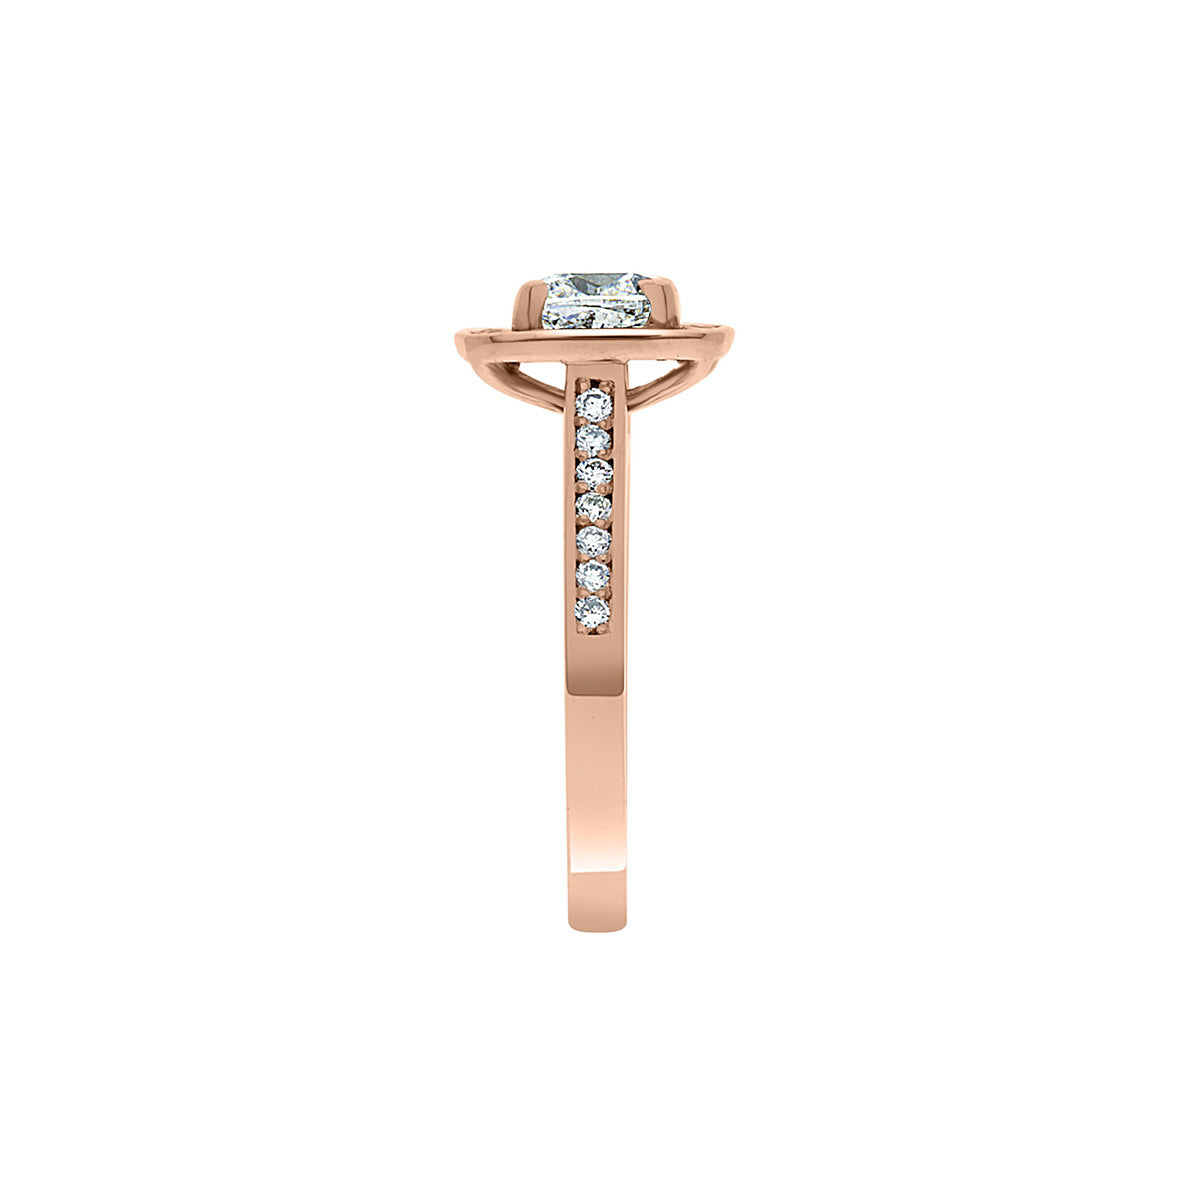 Cushion Cut Diamond Ring in rose gold viewed from the side